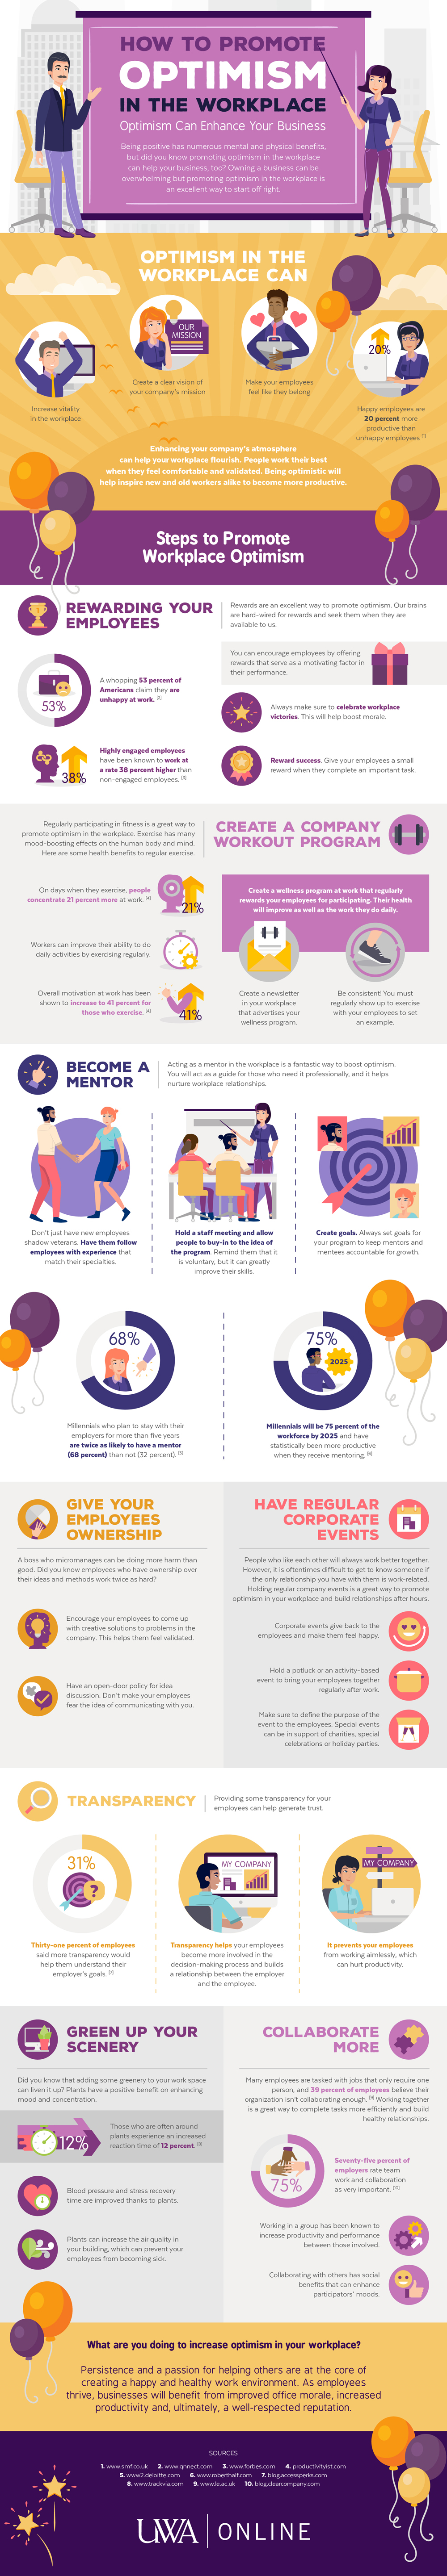 Illustrated infographic discussing the benefits of optimism in the workplace with tips for practicing optimism in a professional setting.